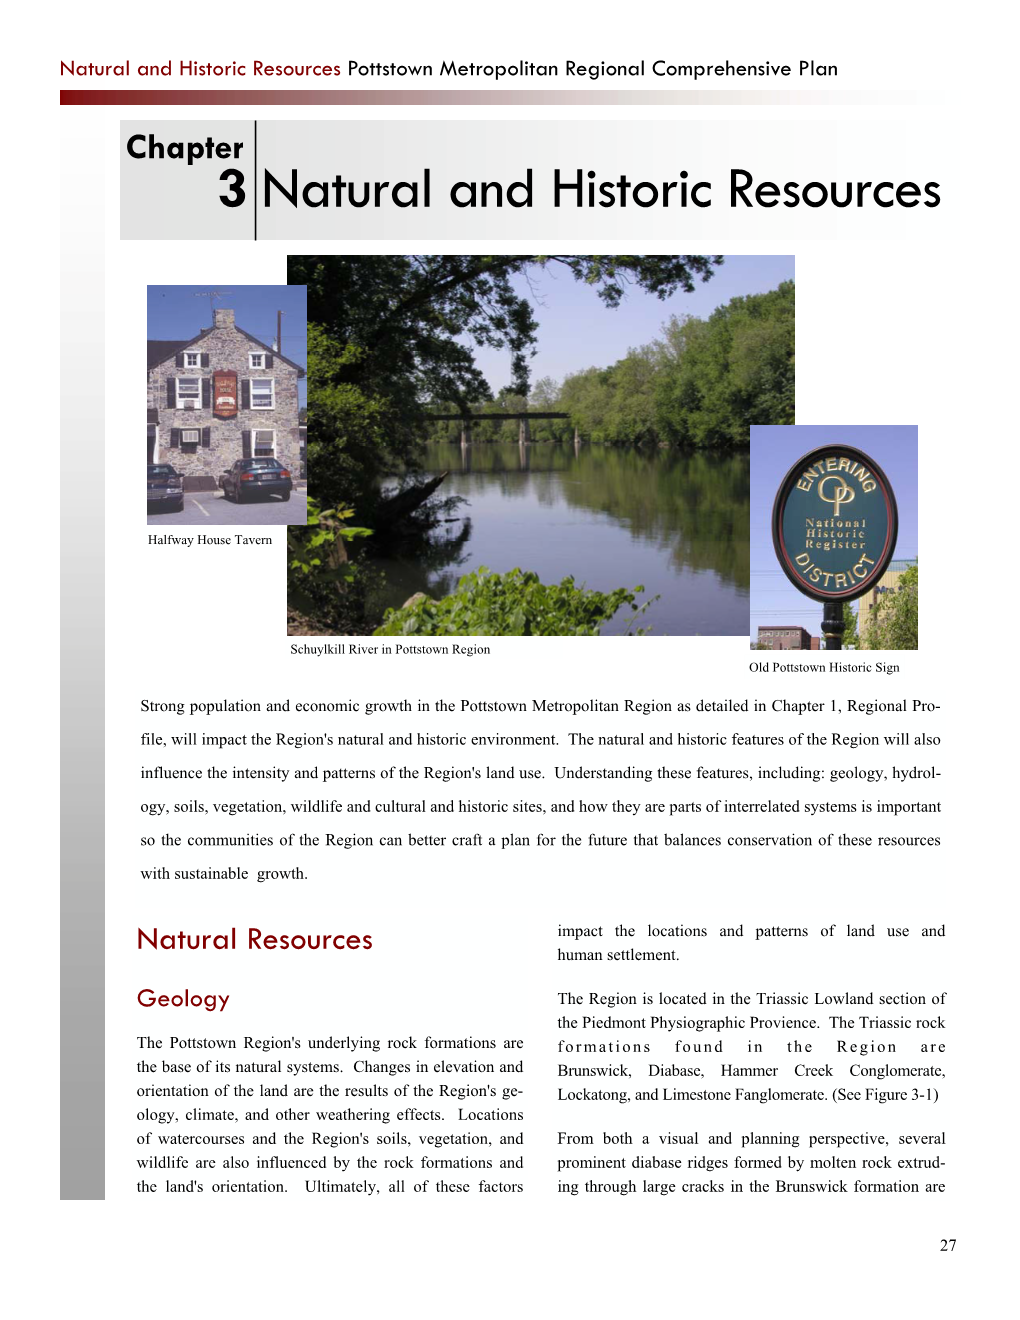 Natural and Historic Resources 3